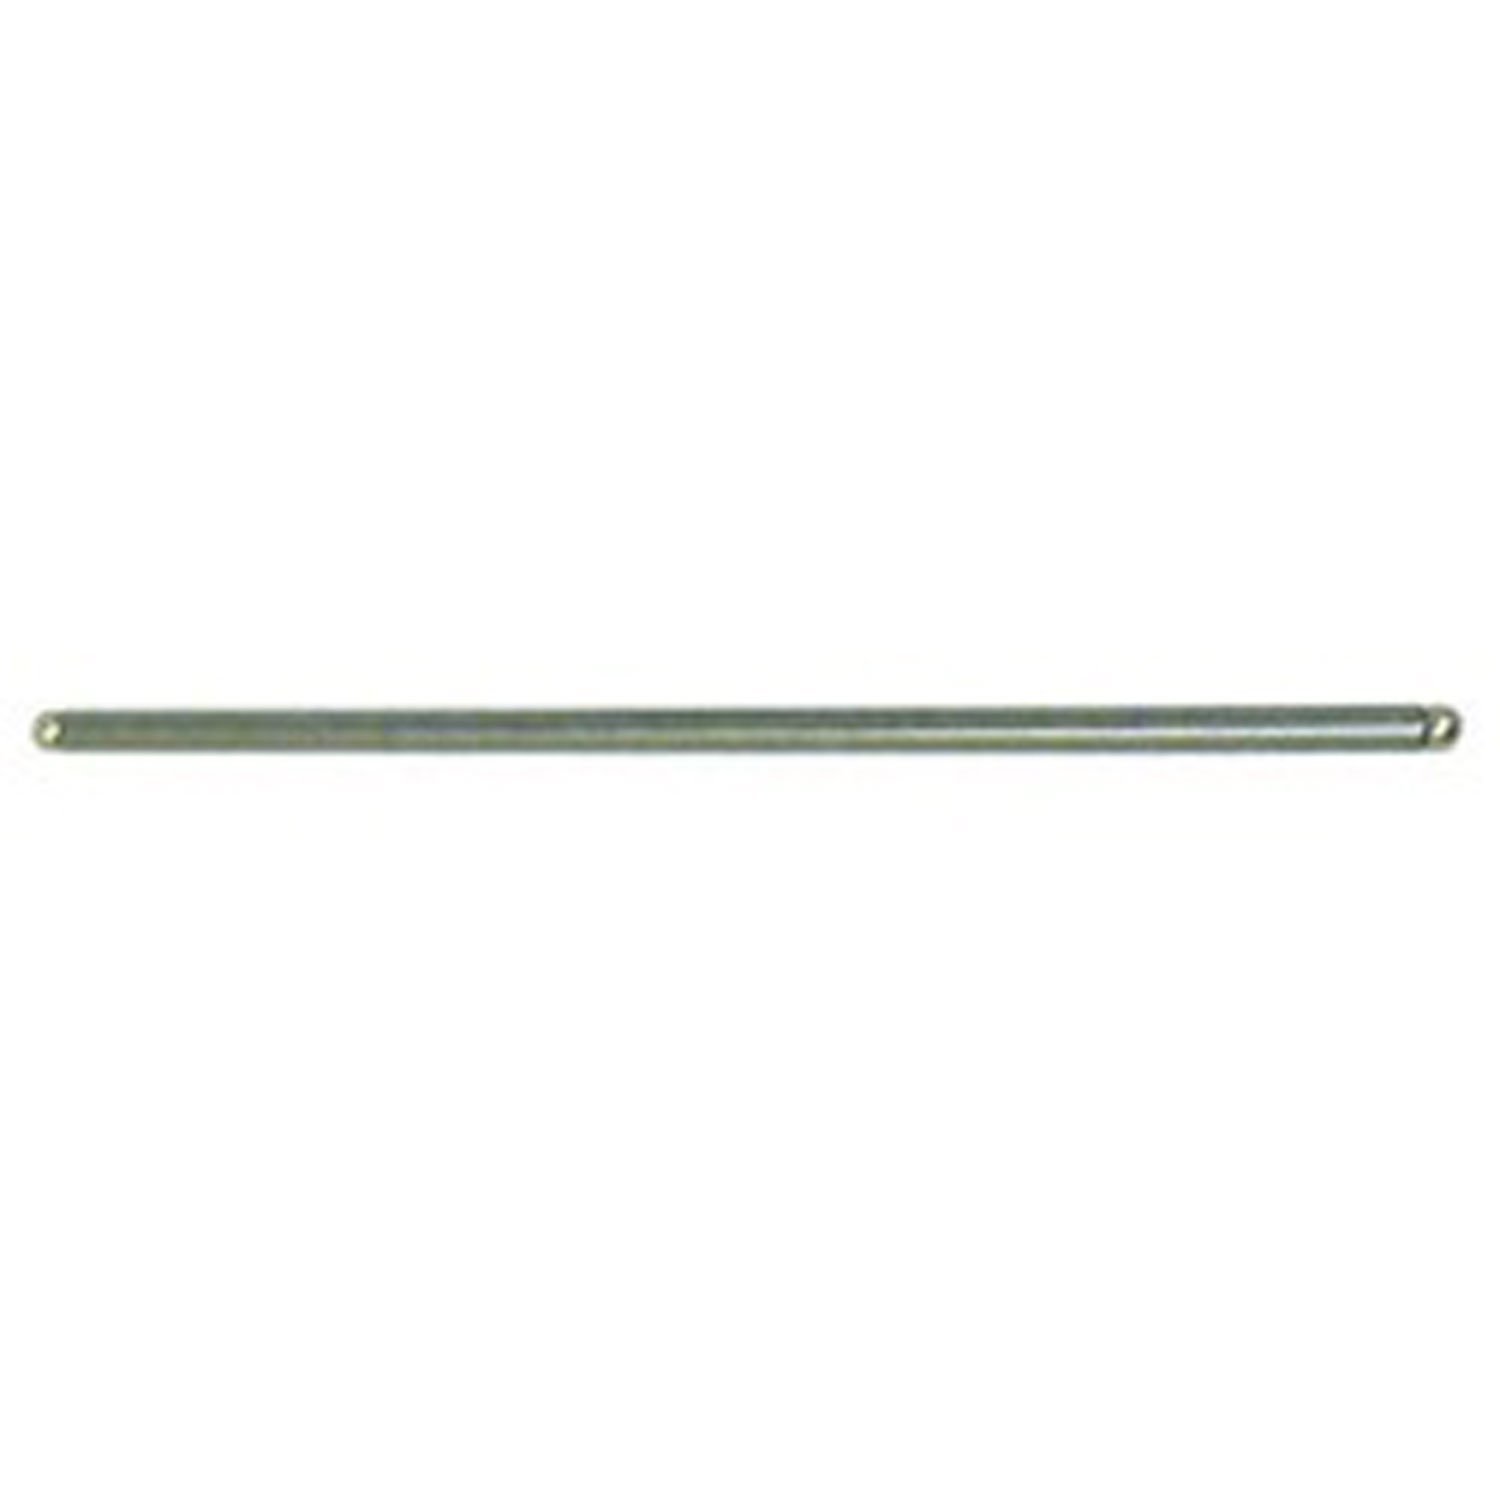 Push Rod for 1981-1990 Jeep Models with 4.2L (258 6 cylinder) Engine